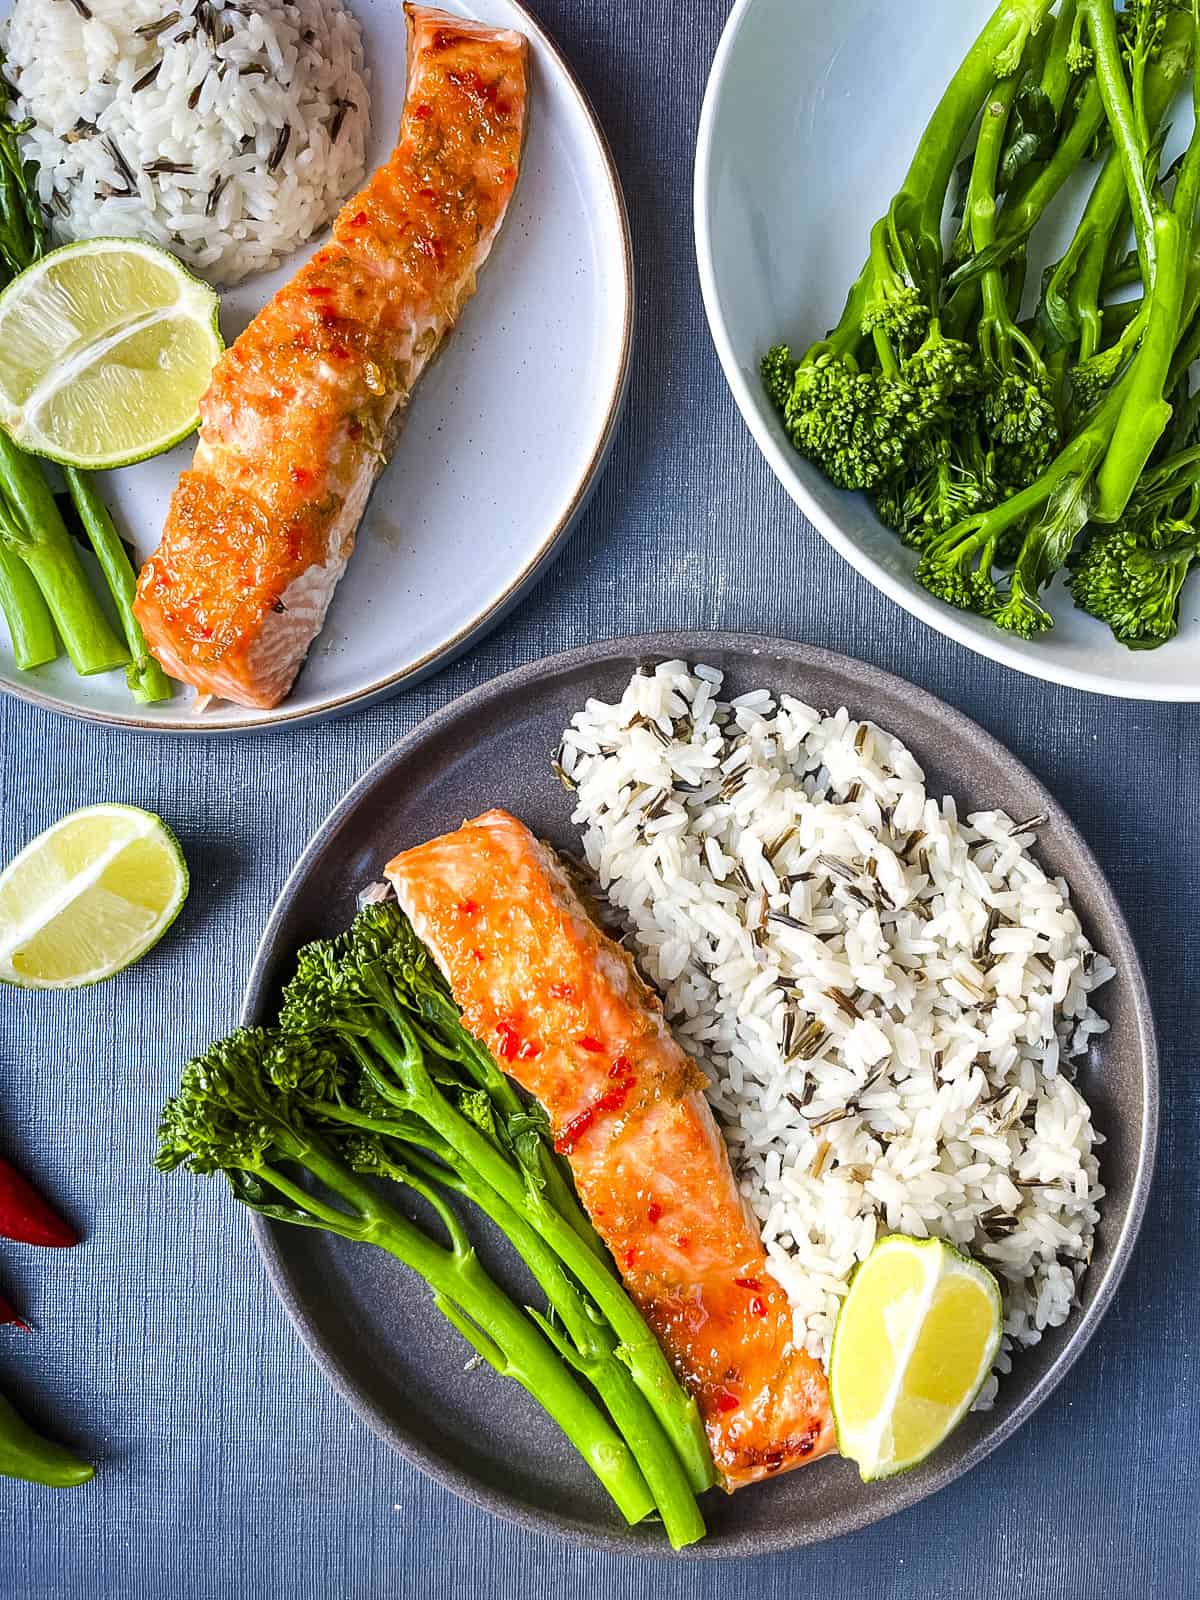 two plates of baked salmon fillet served with wild rice and tender stem broccoli.